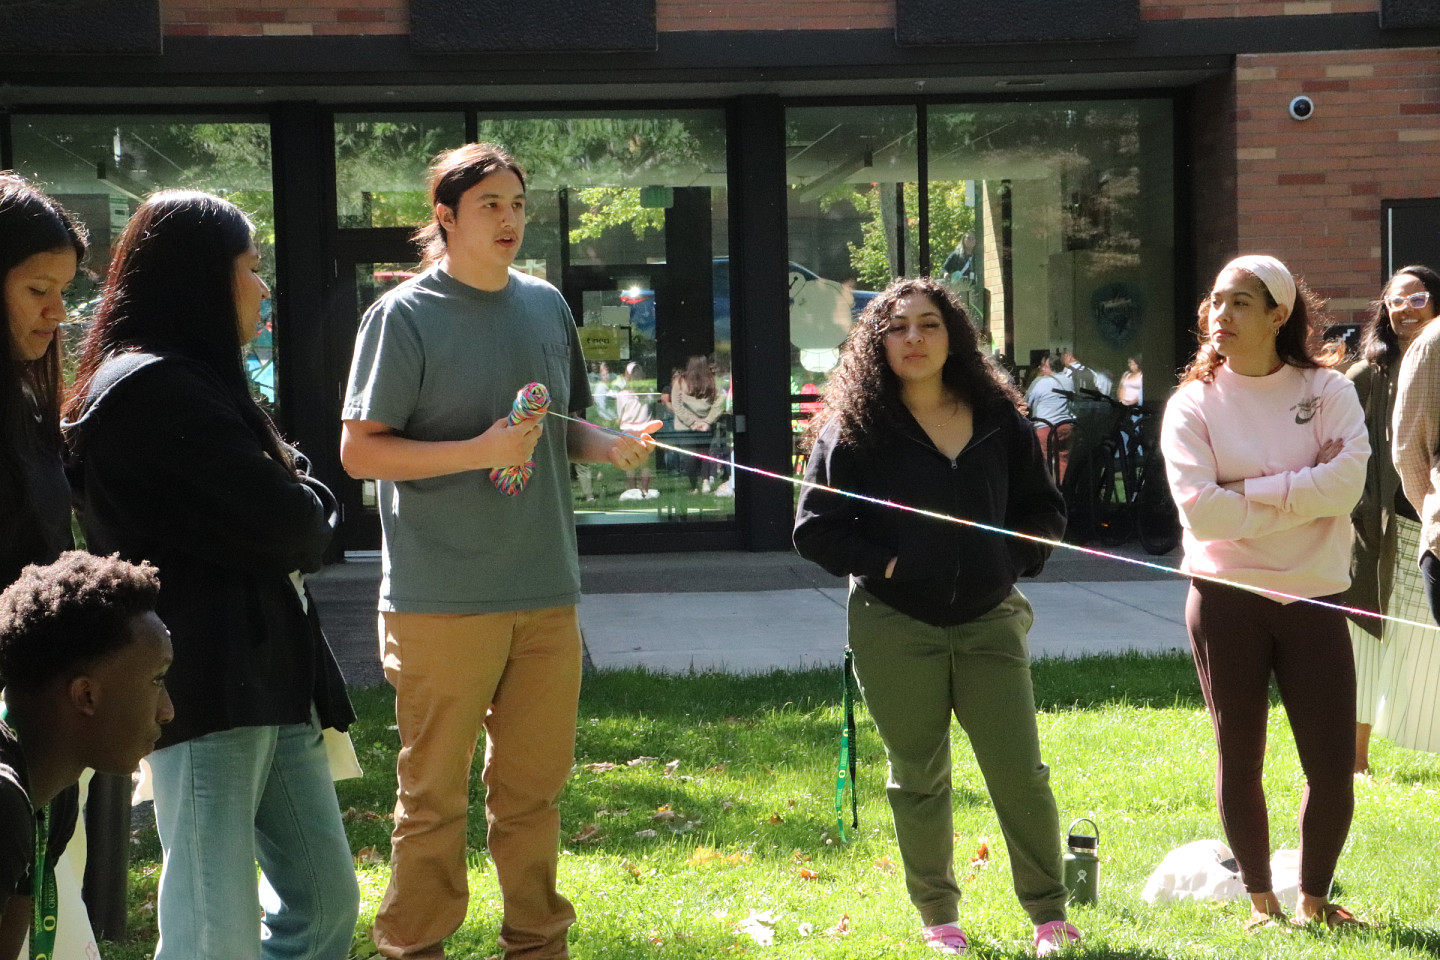 Students do a connection activity with yarn on a green lawn